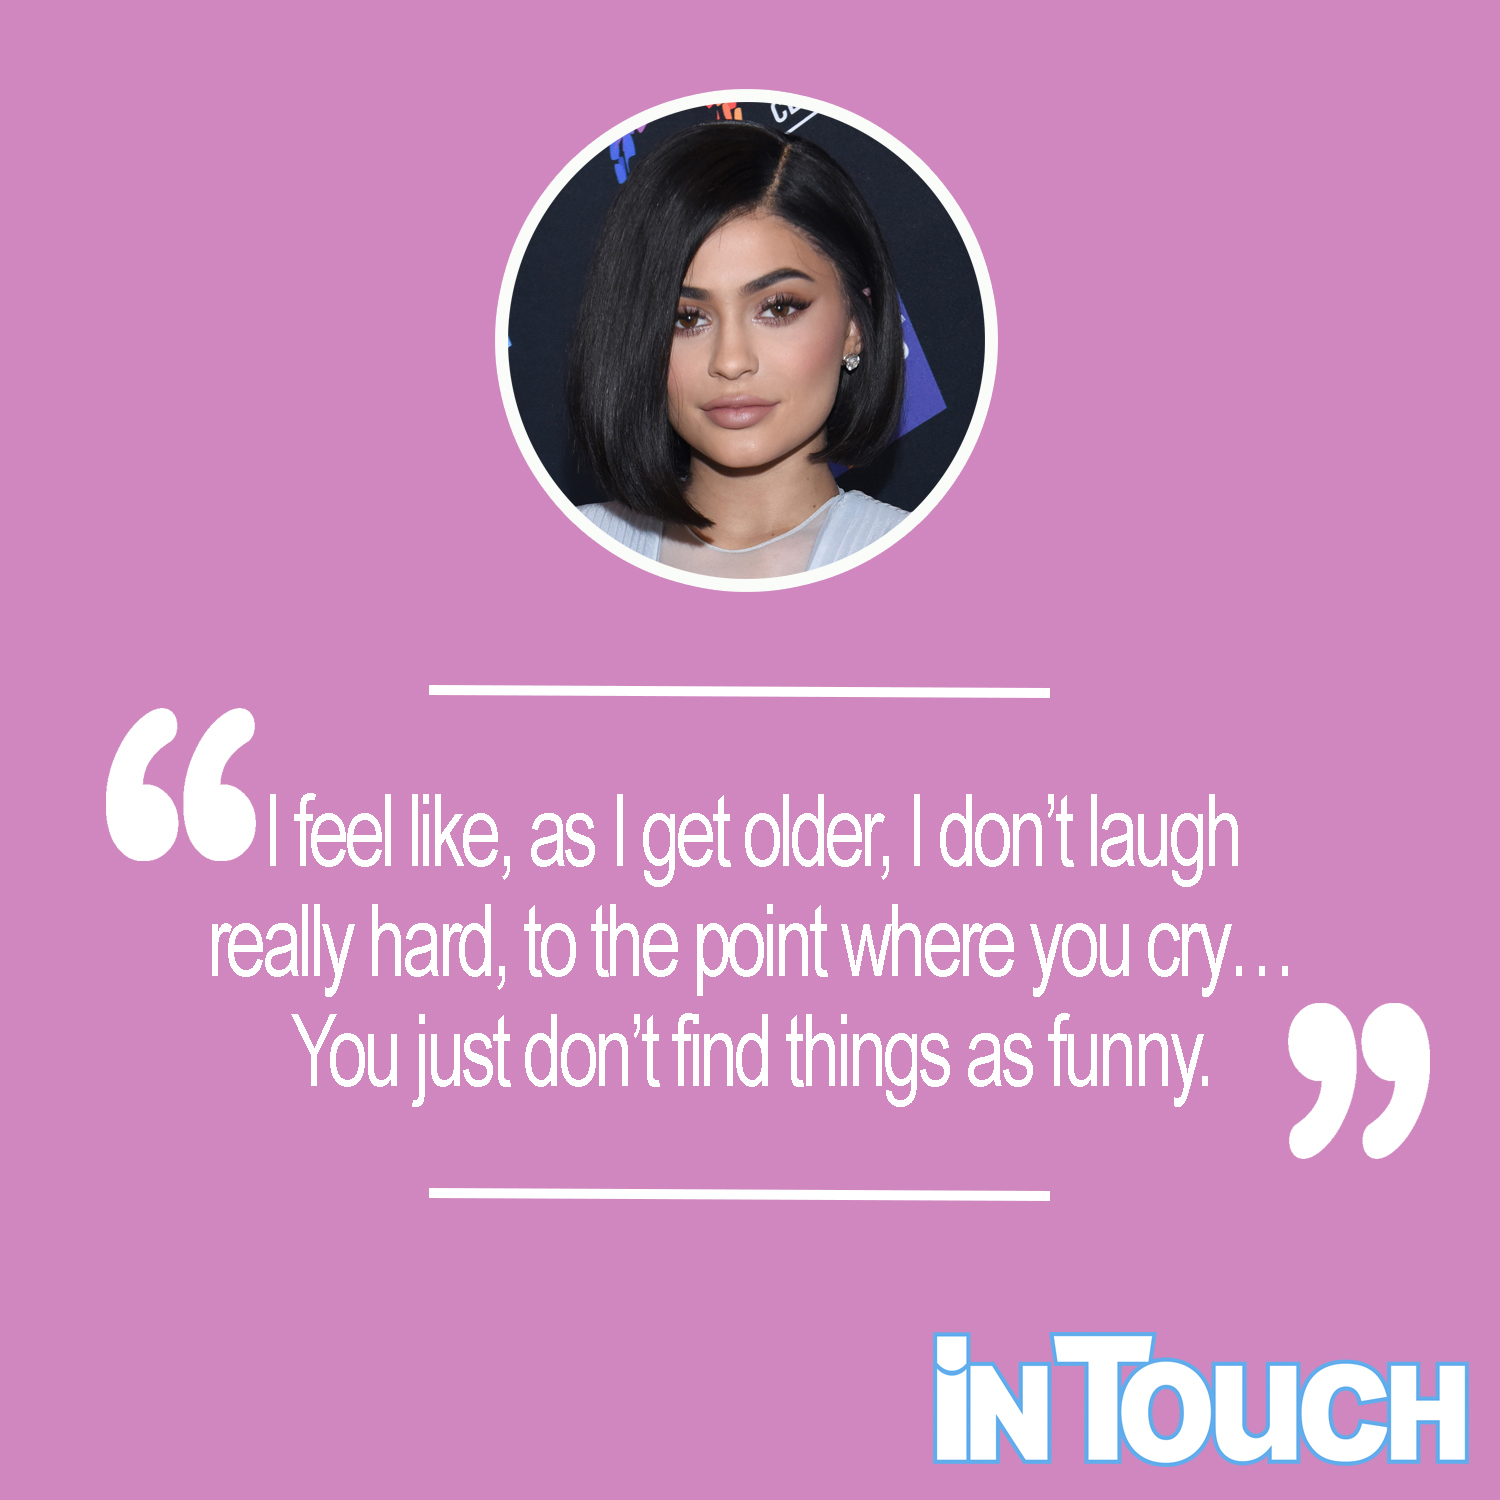 Kylie Jenner's Fashion Stylist Opens Up About 'Vicious' Cycle